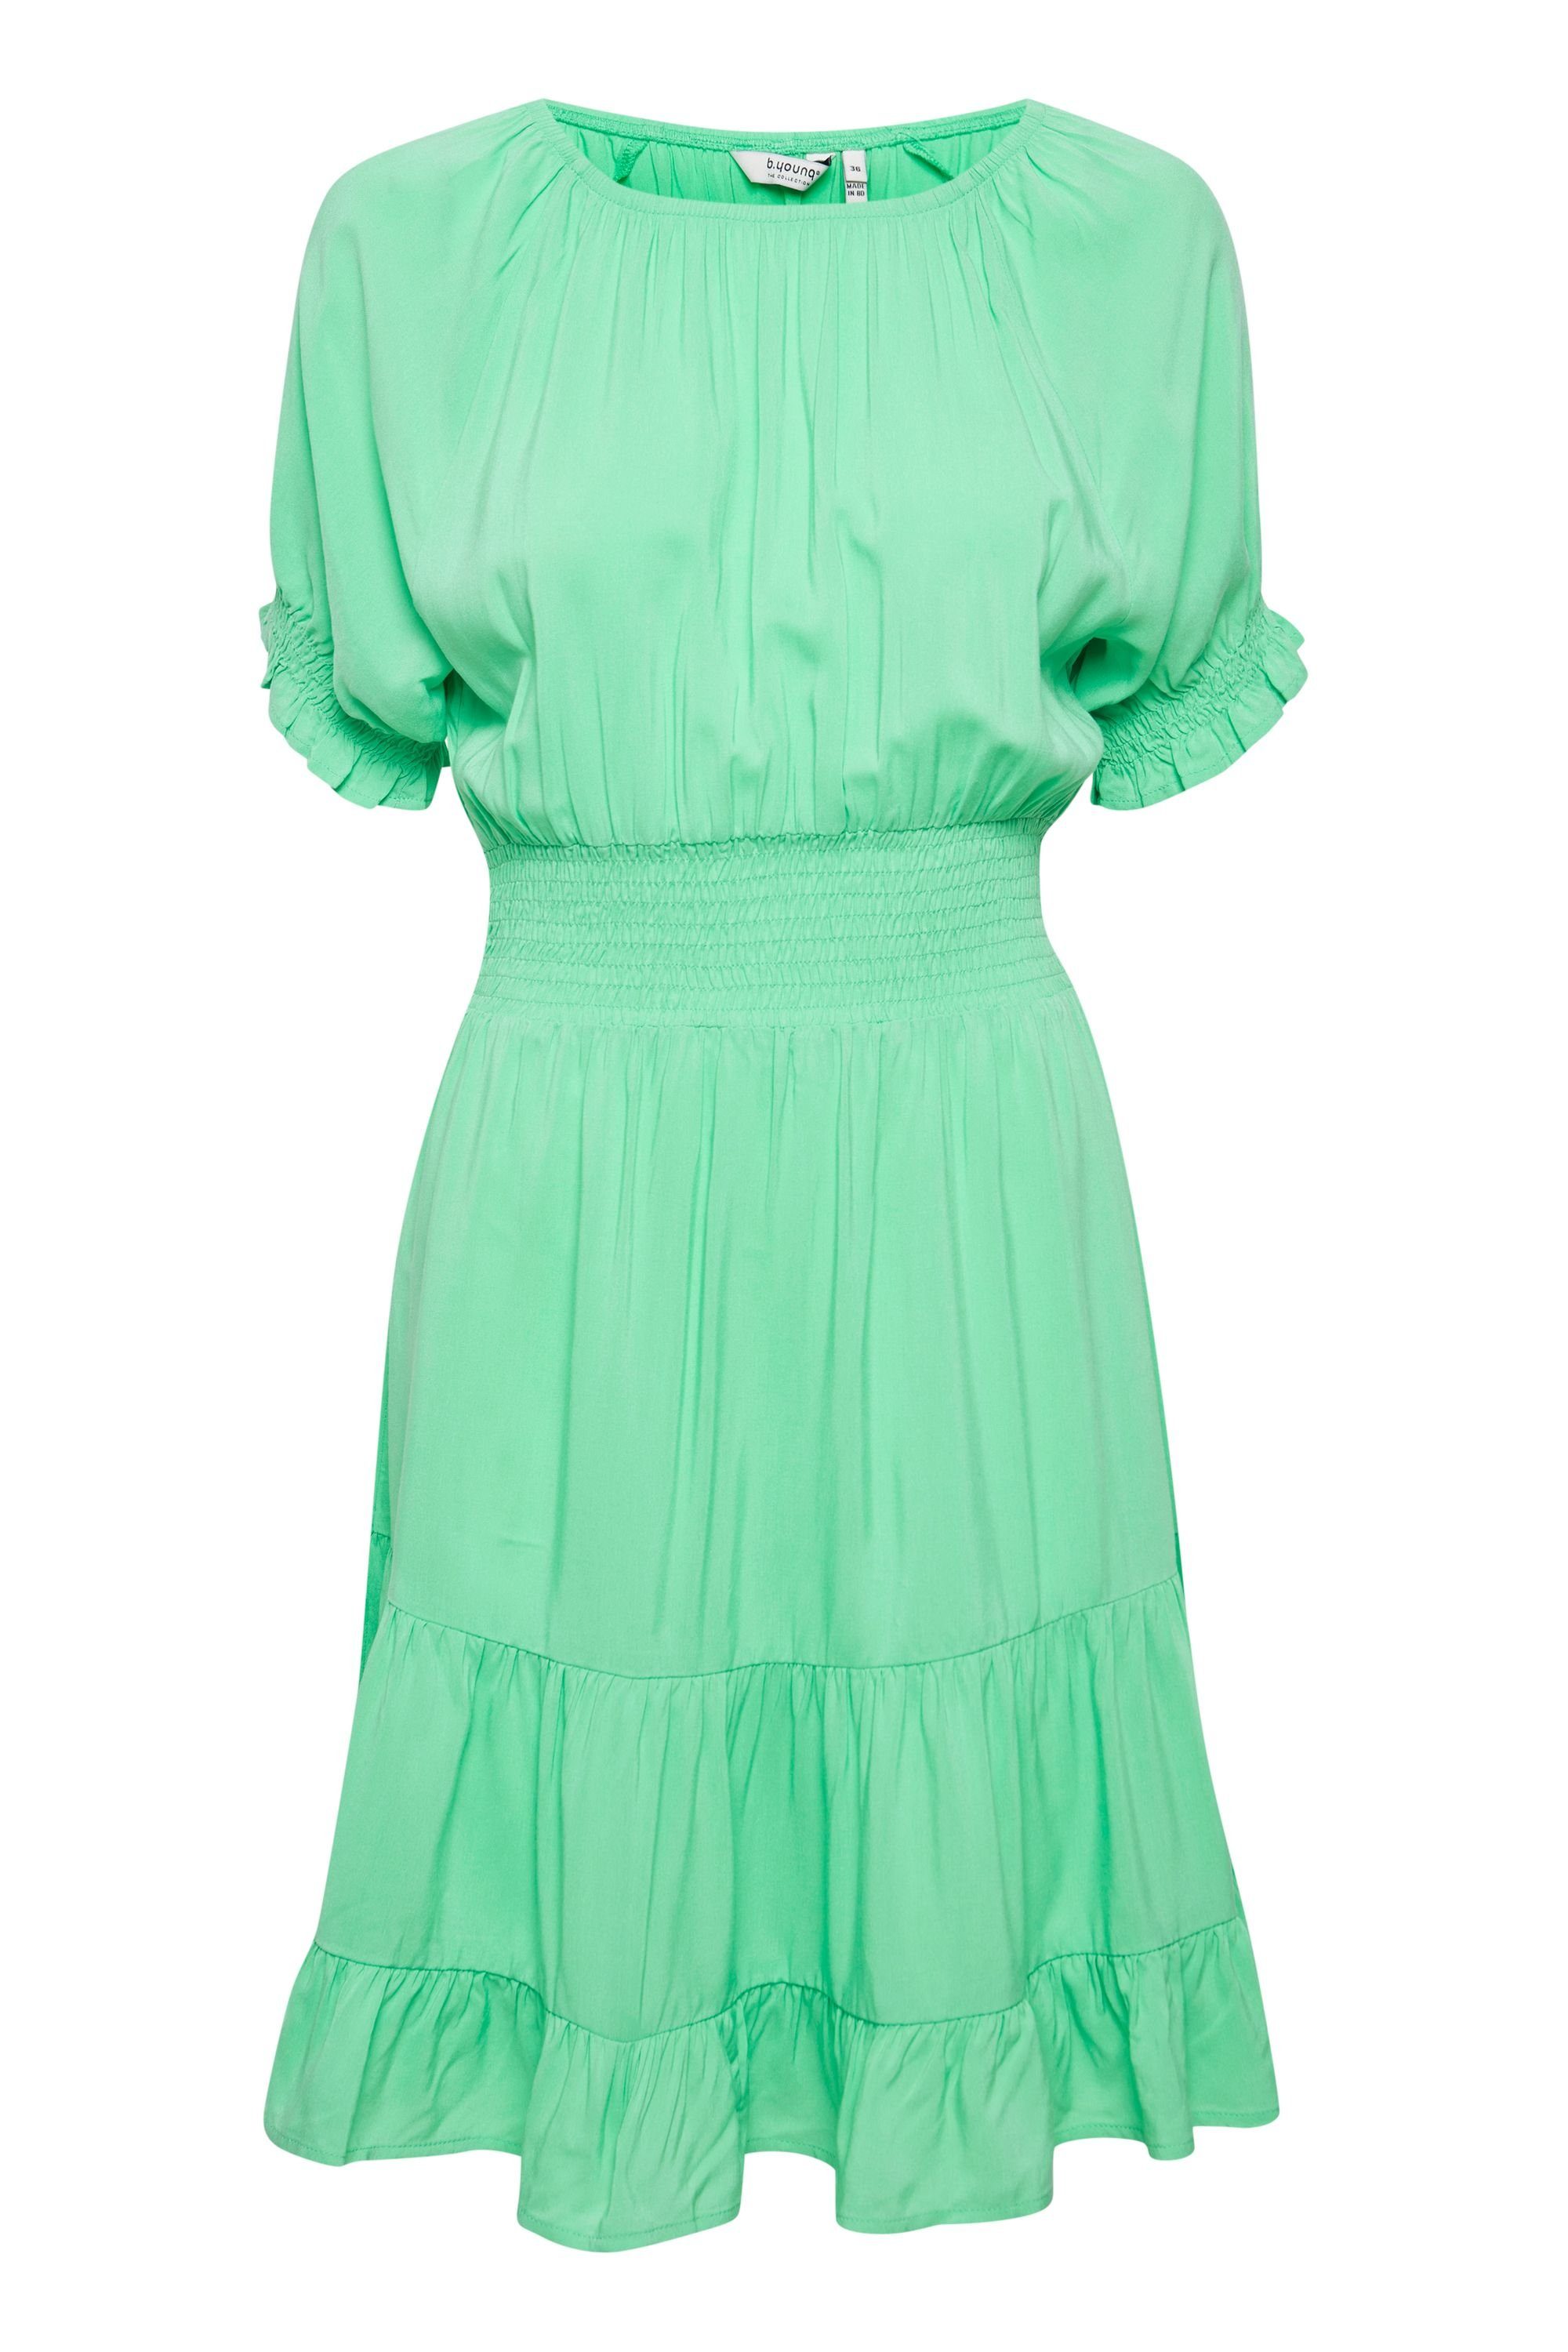 20812923 - DR BYMMJOELLA b.young Spring S Jerseykleid (146330) SMOCK Bud